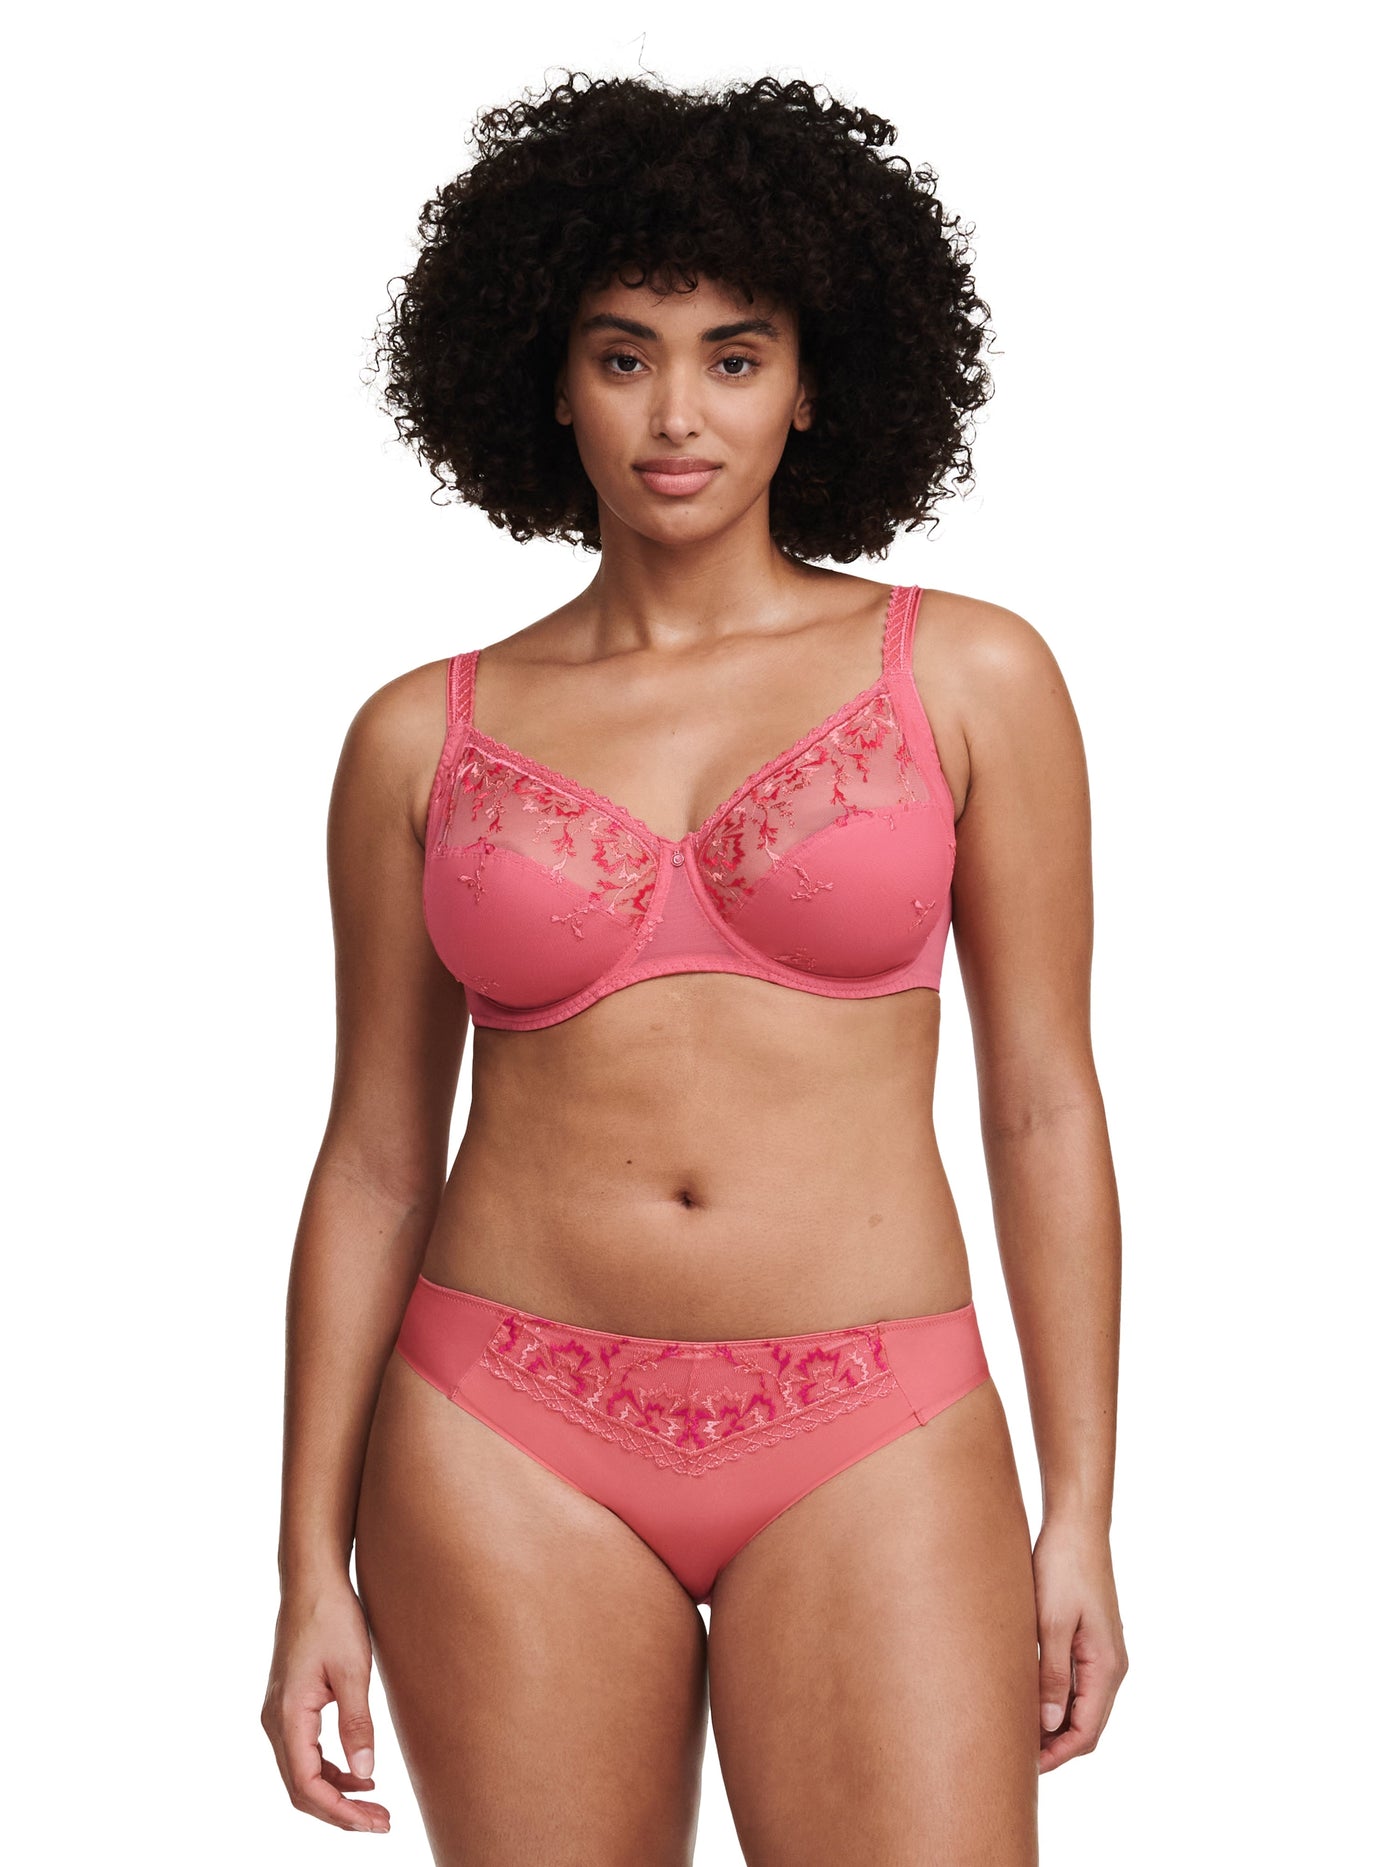 Chantelle Every Curve Very Covering Underwired Bra - Corallin Shades Full Cup Bra Chantelle 